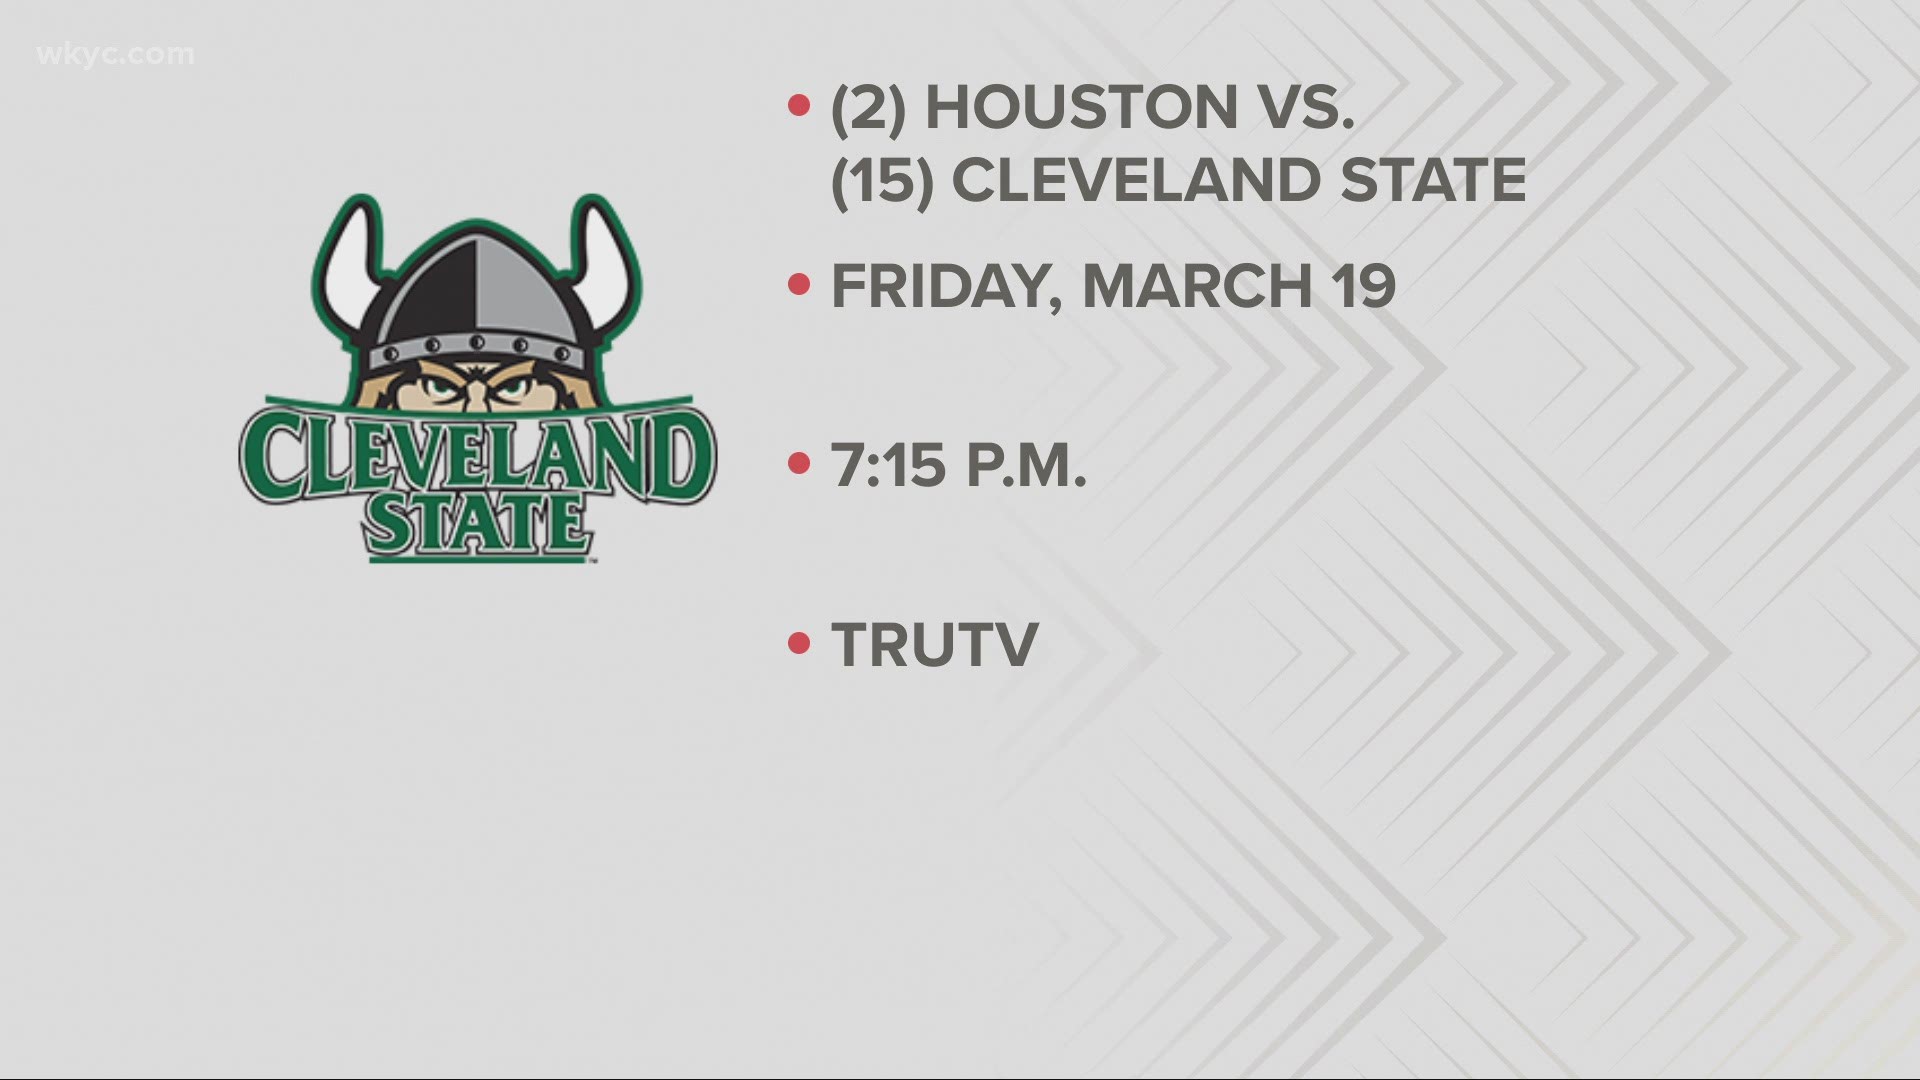 Ohio State and Cleveland State will both play on Friday. Ohio University will be in action on Saturday.